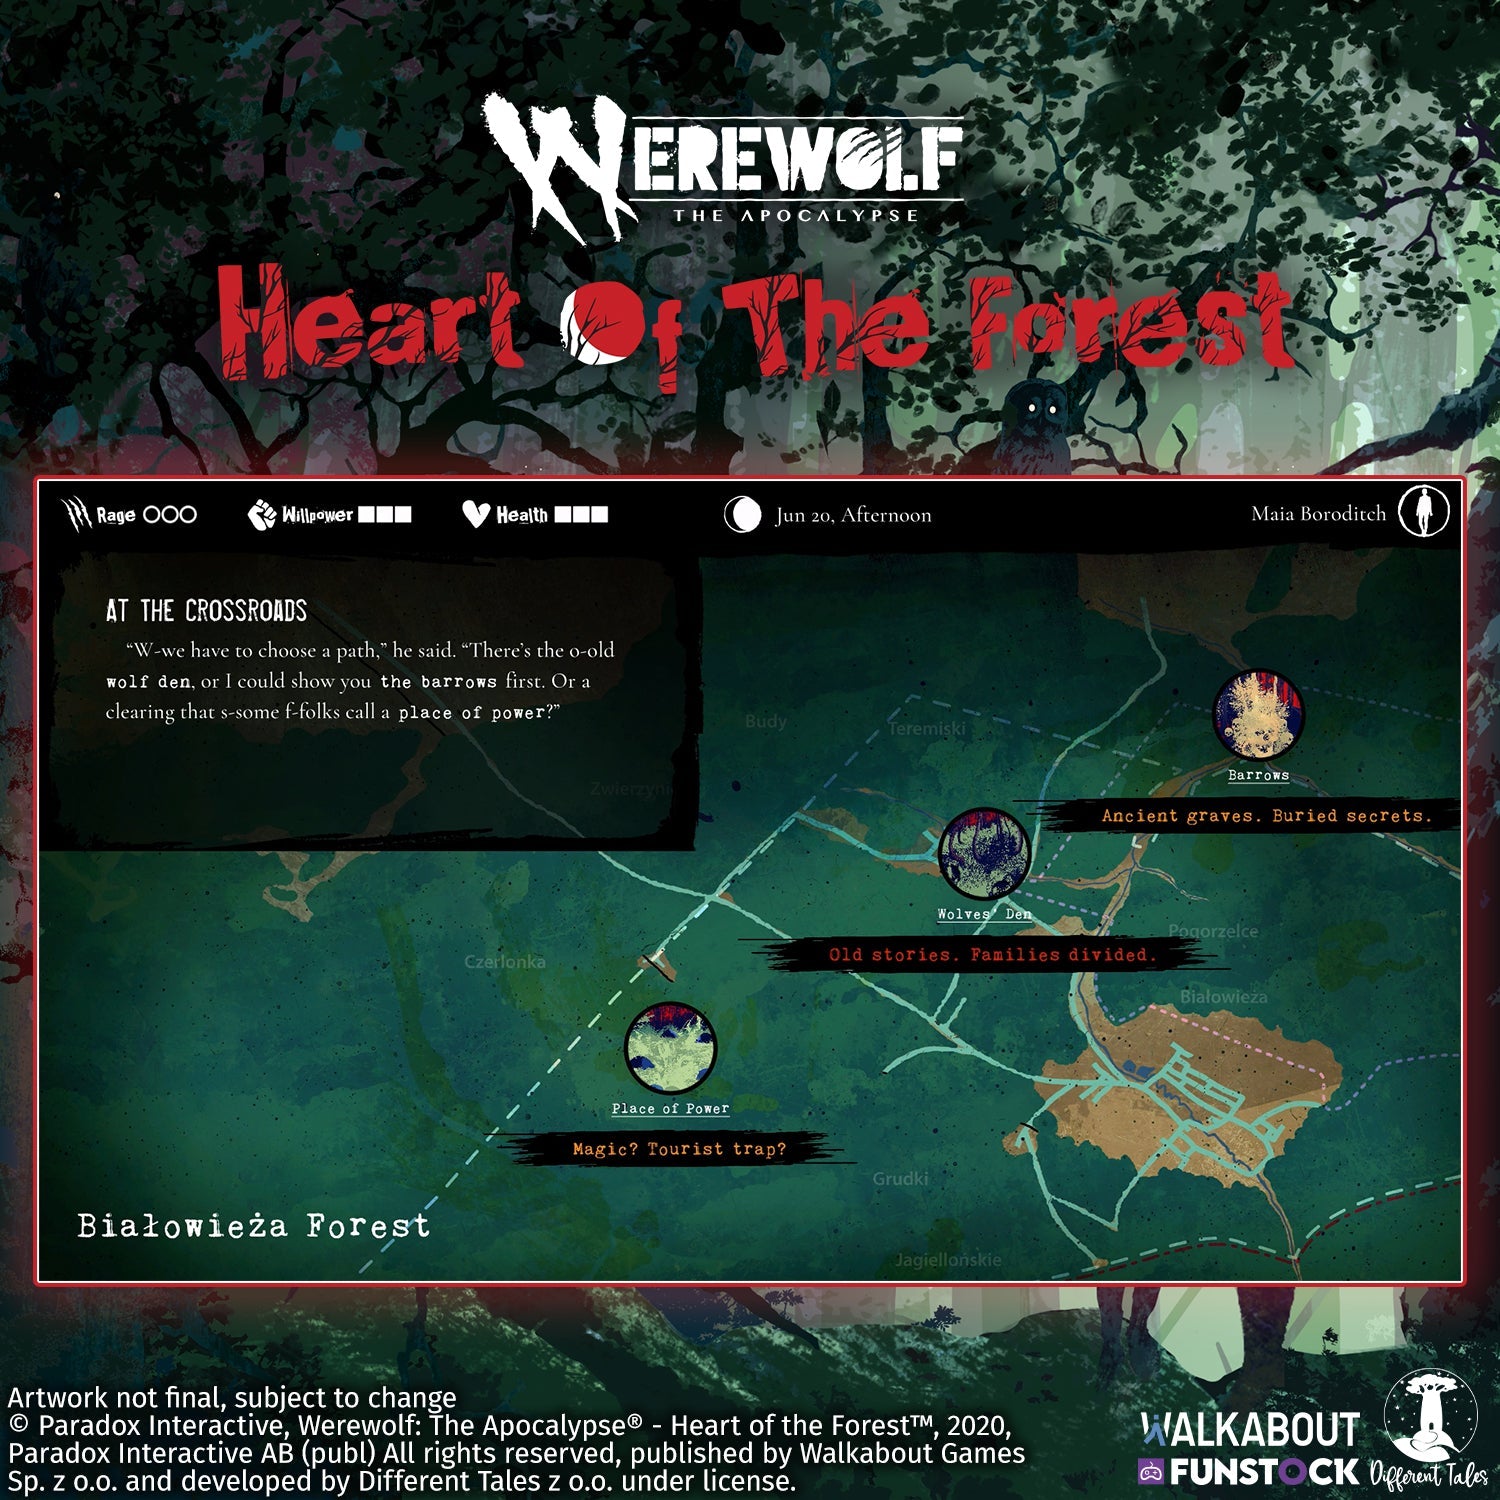 Werewolf: The Apocalypse - Heart of the Forest (PlayStation 4)